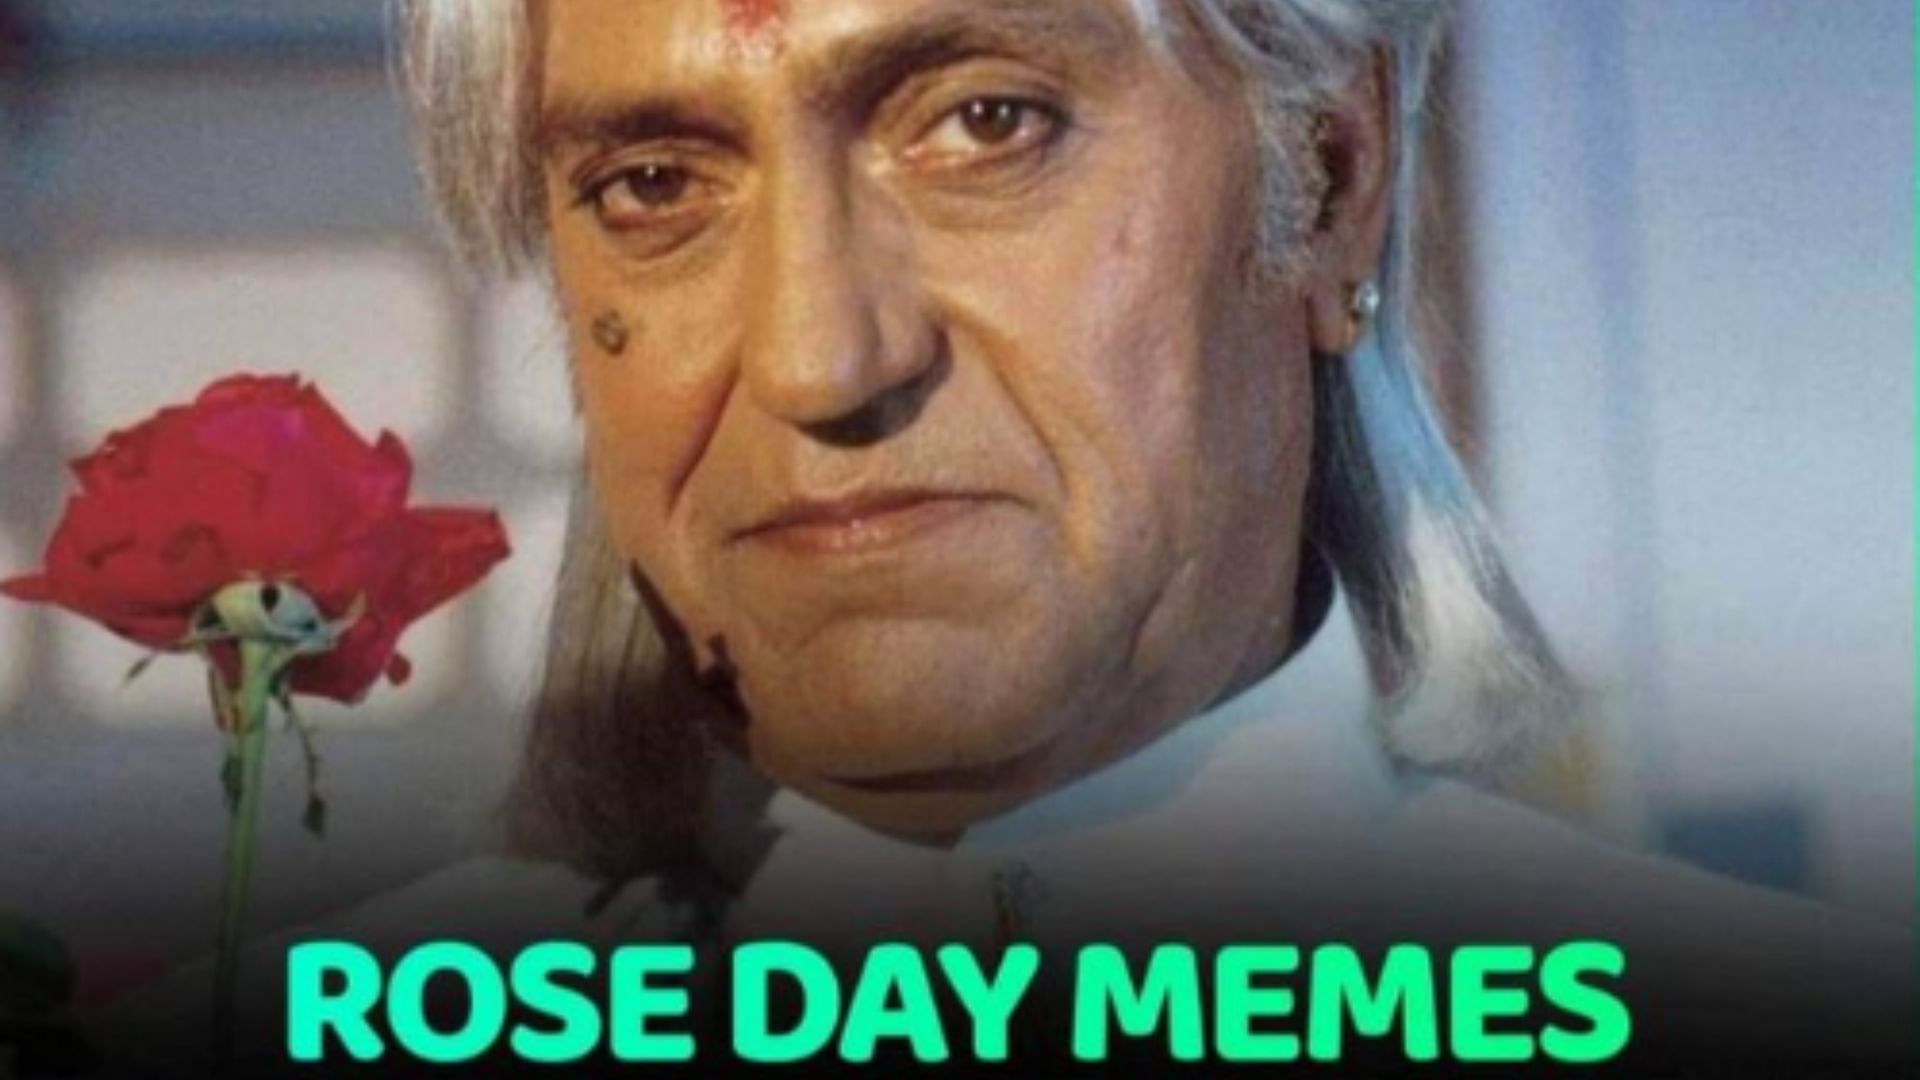 Rose Day Memes: Funny memes on rose day viral on twitter Valentines day memes